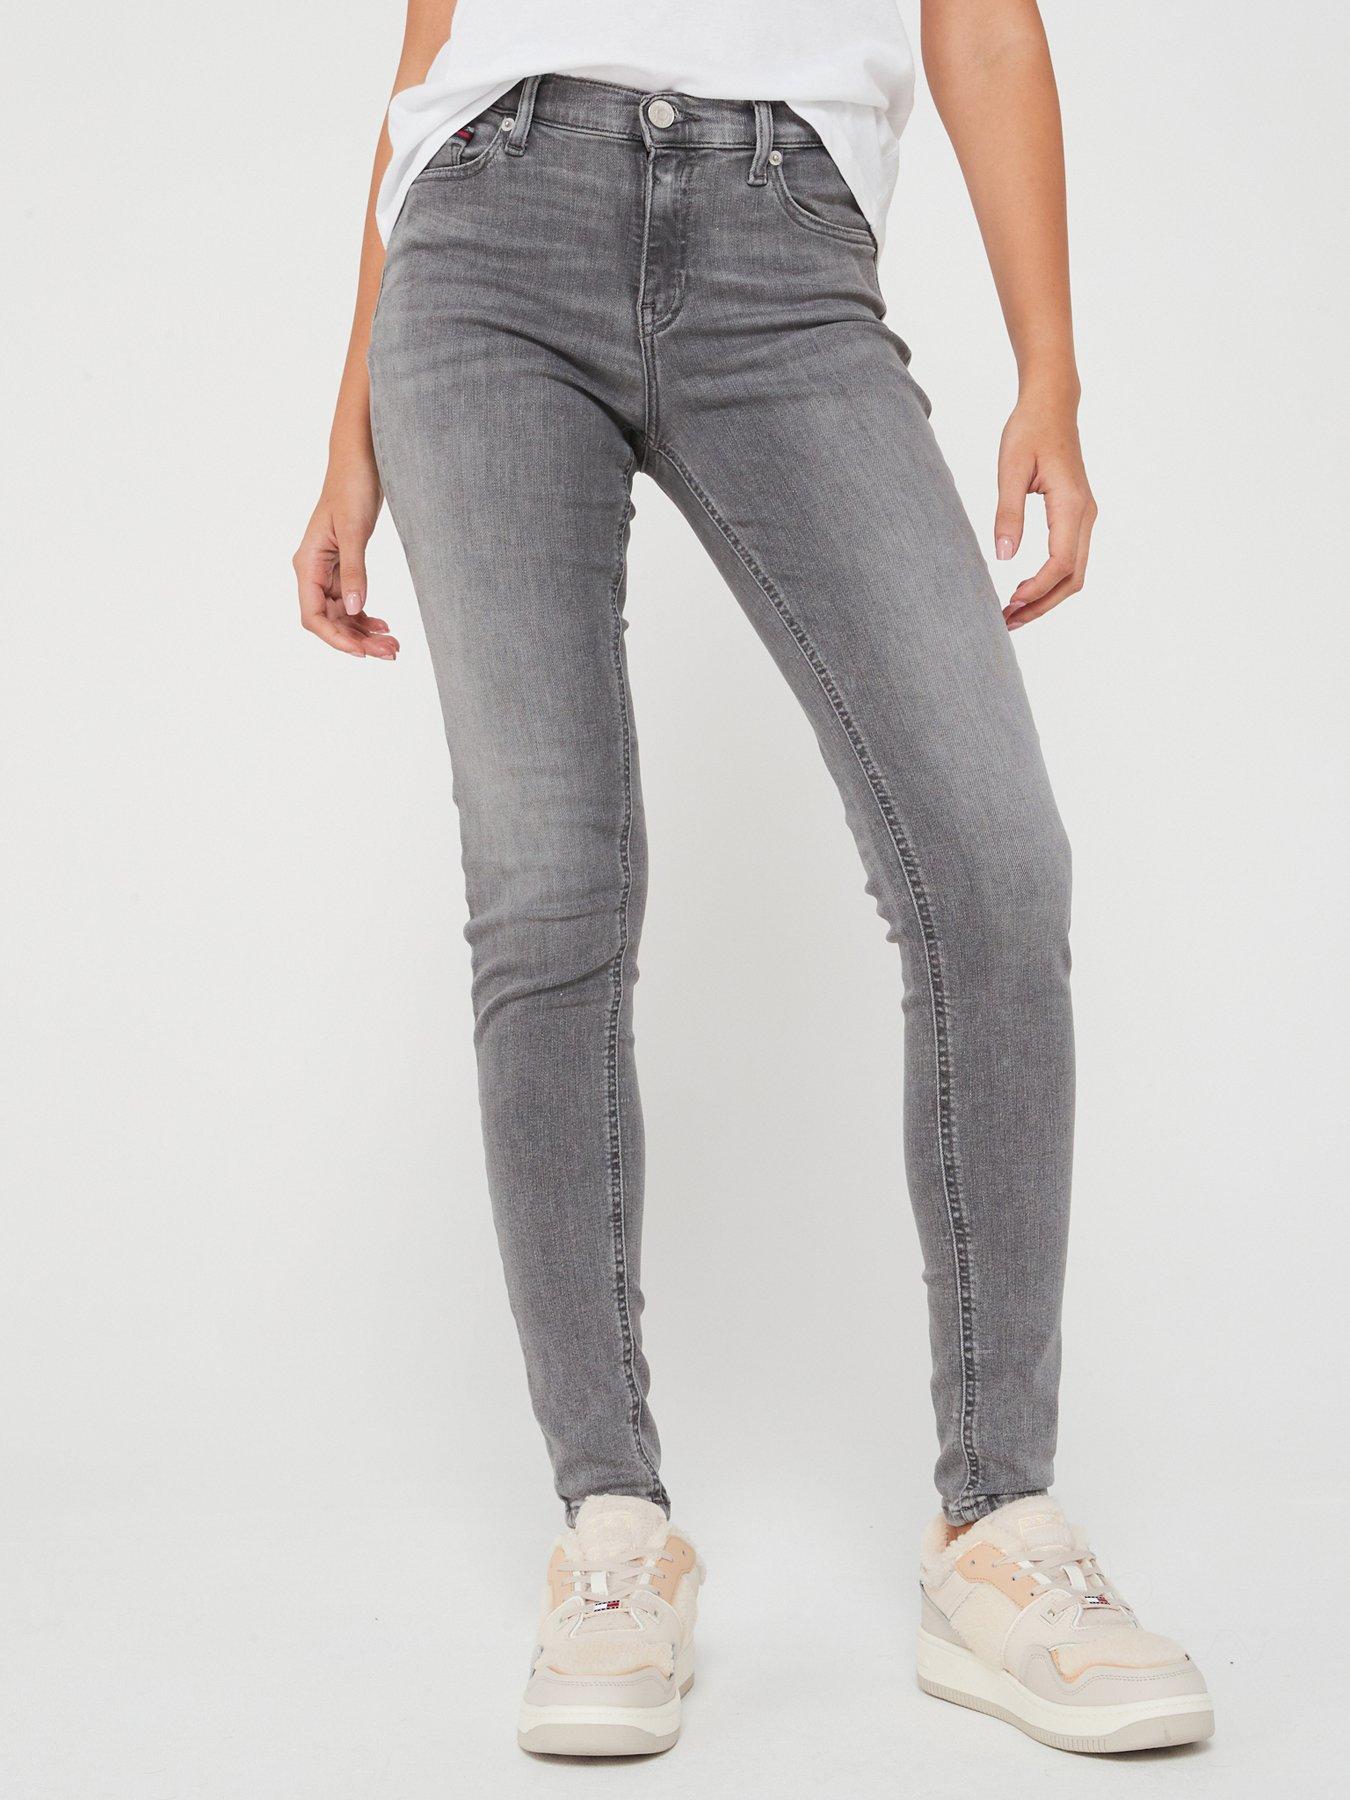 Tommy Jeans ultra high rise mom jean in mid wash